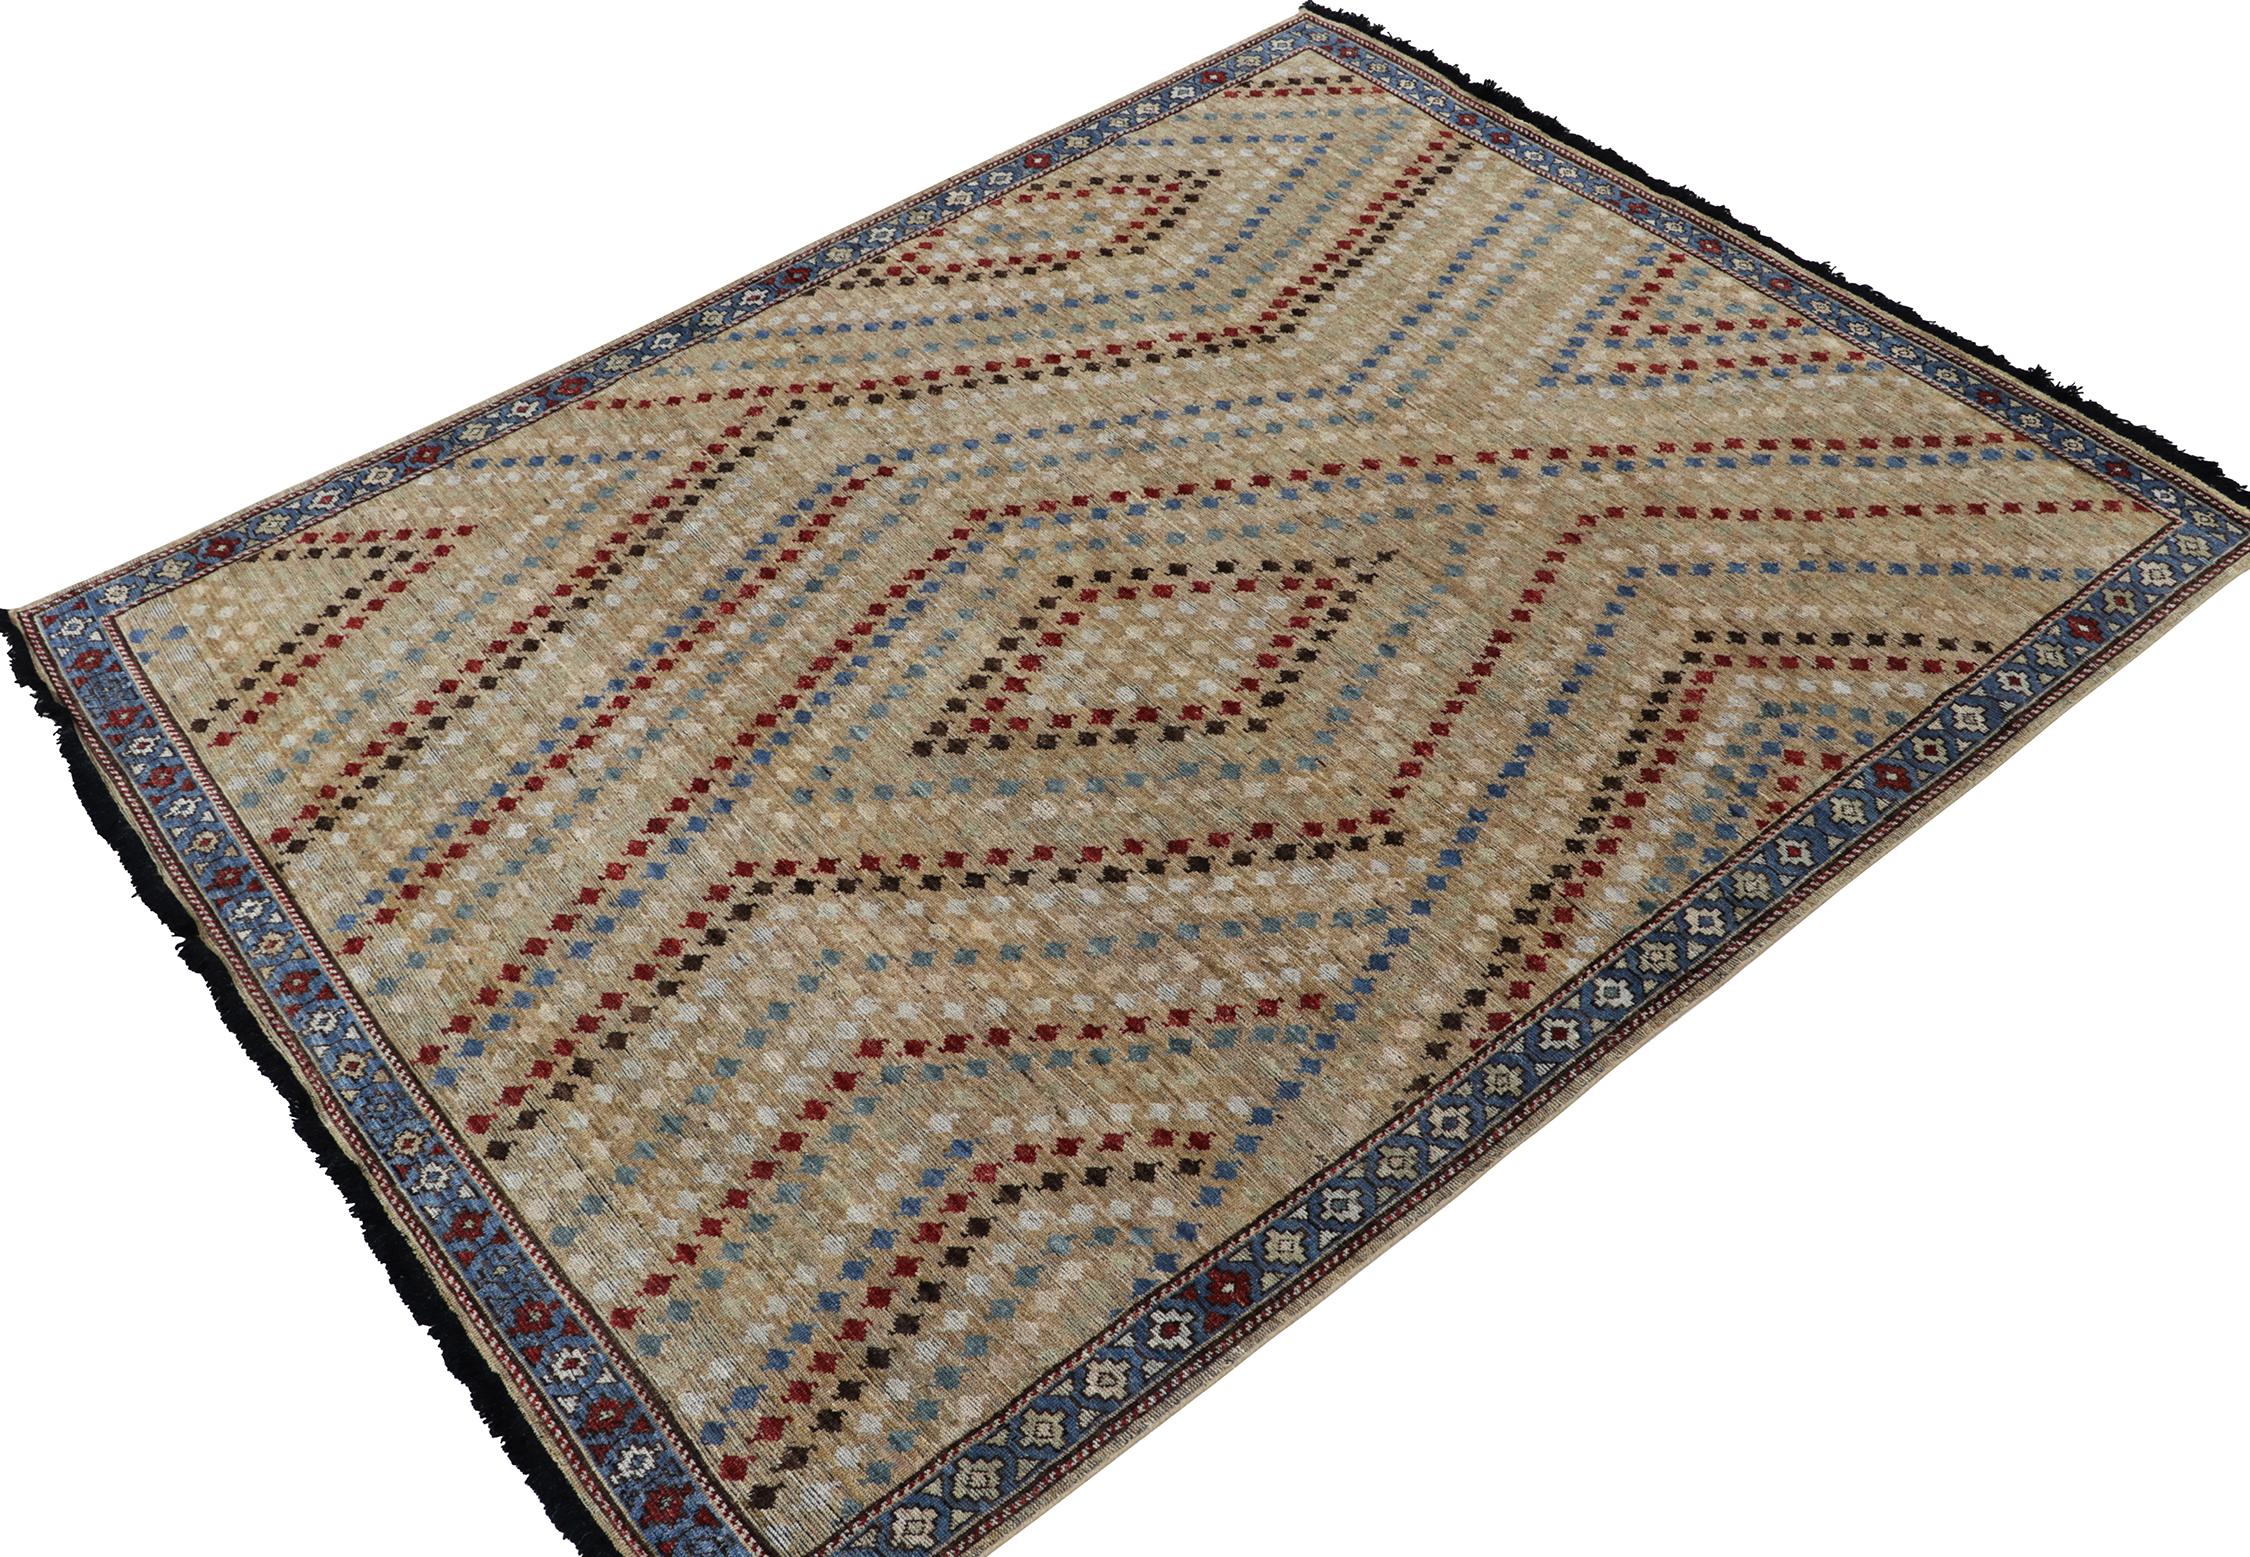 This 8x10 rug is a regal new entry to Rug & Kilim’s custom classics Burano collection. Hand-knotted in Persian wool.
Further on the Design: 
This piece draws on tribal rugs and rippling patterns in rich red, brown, and blue on a beige background.